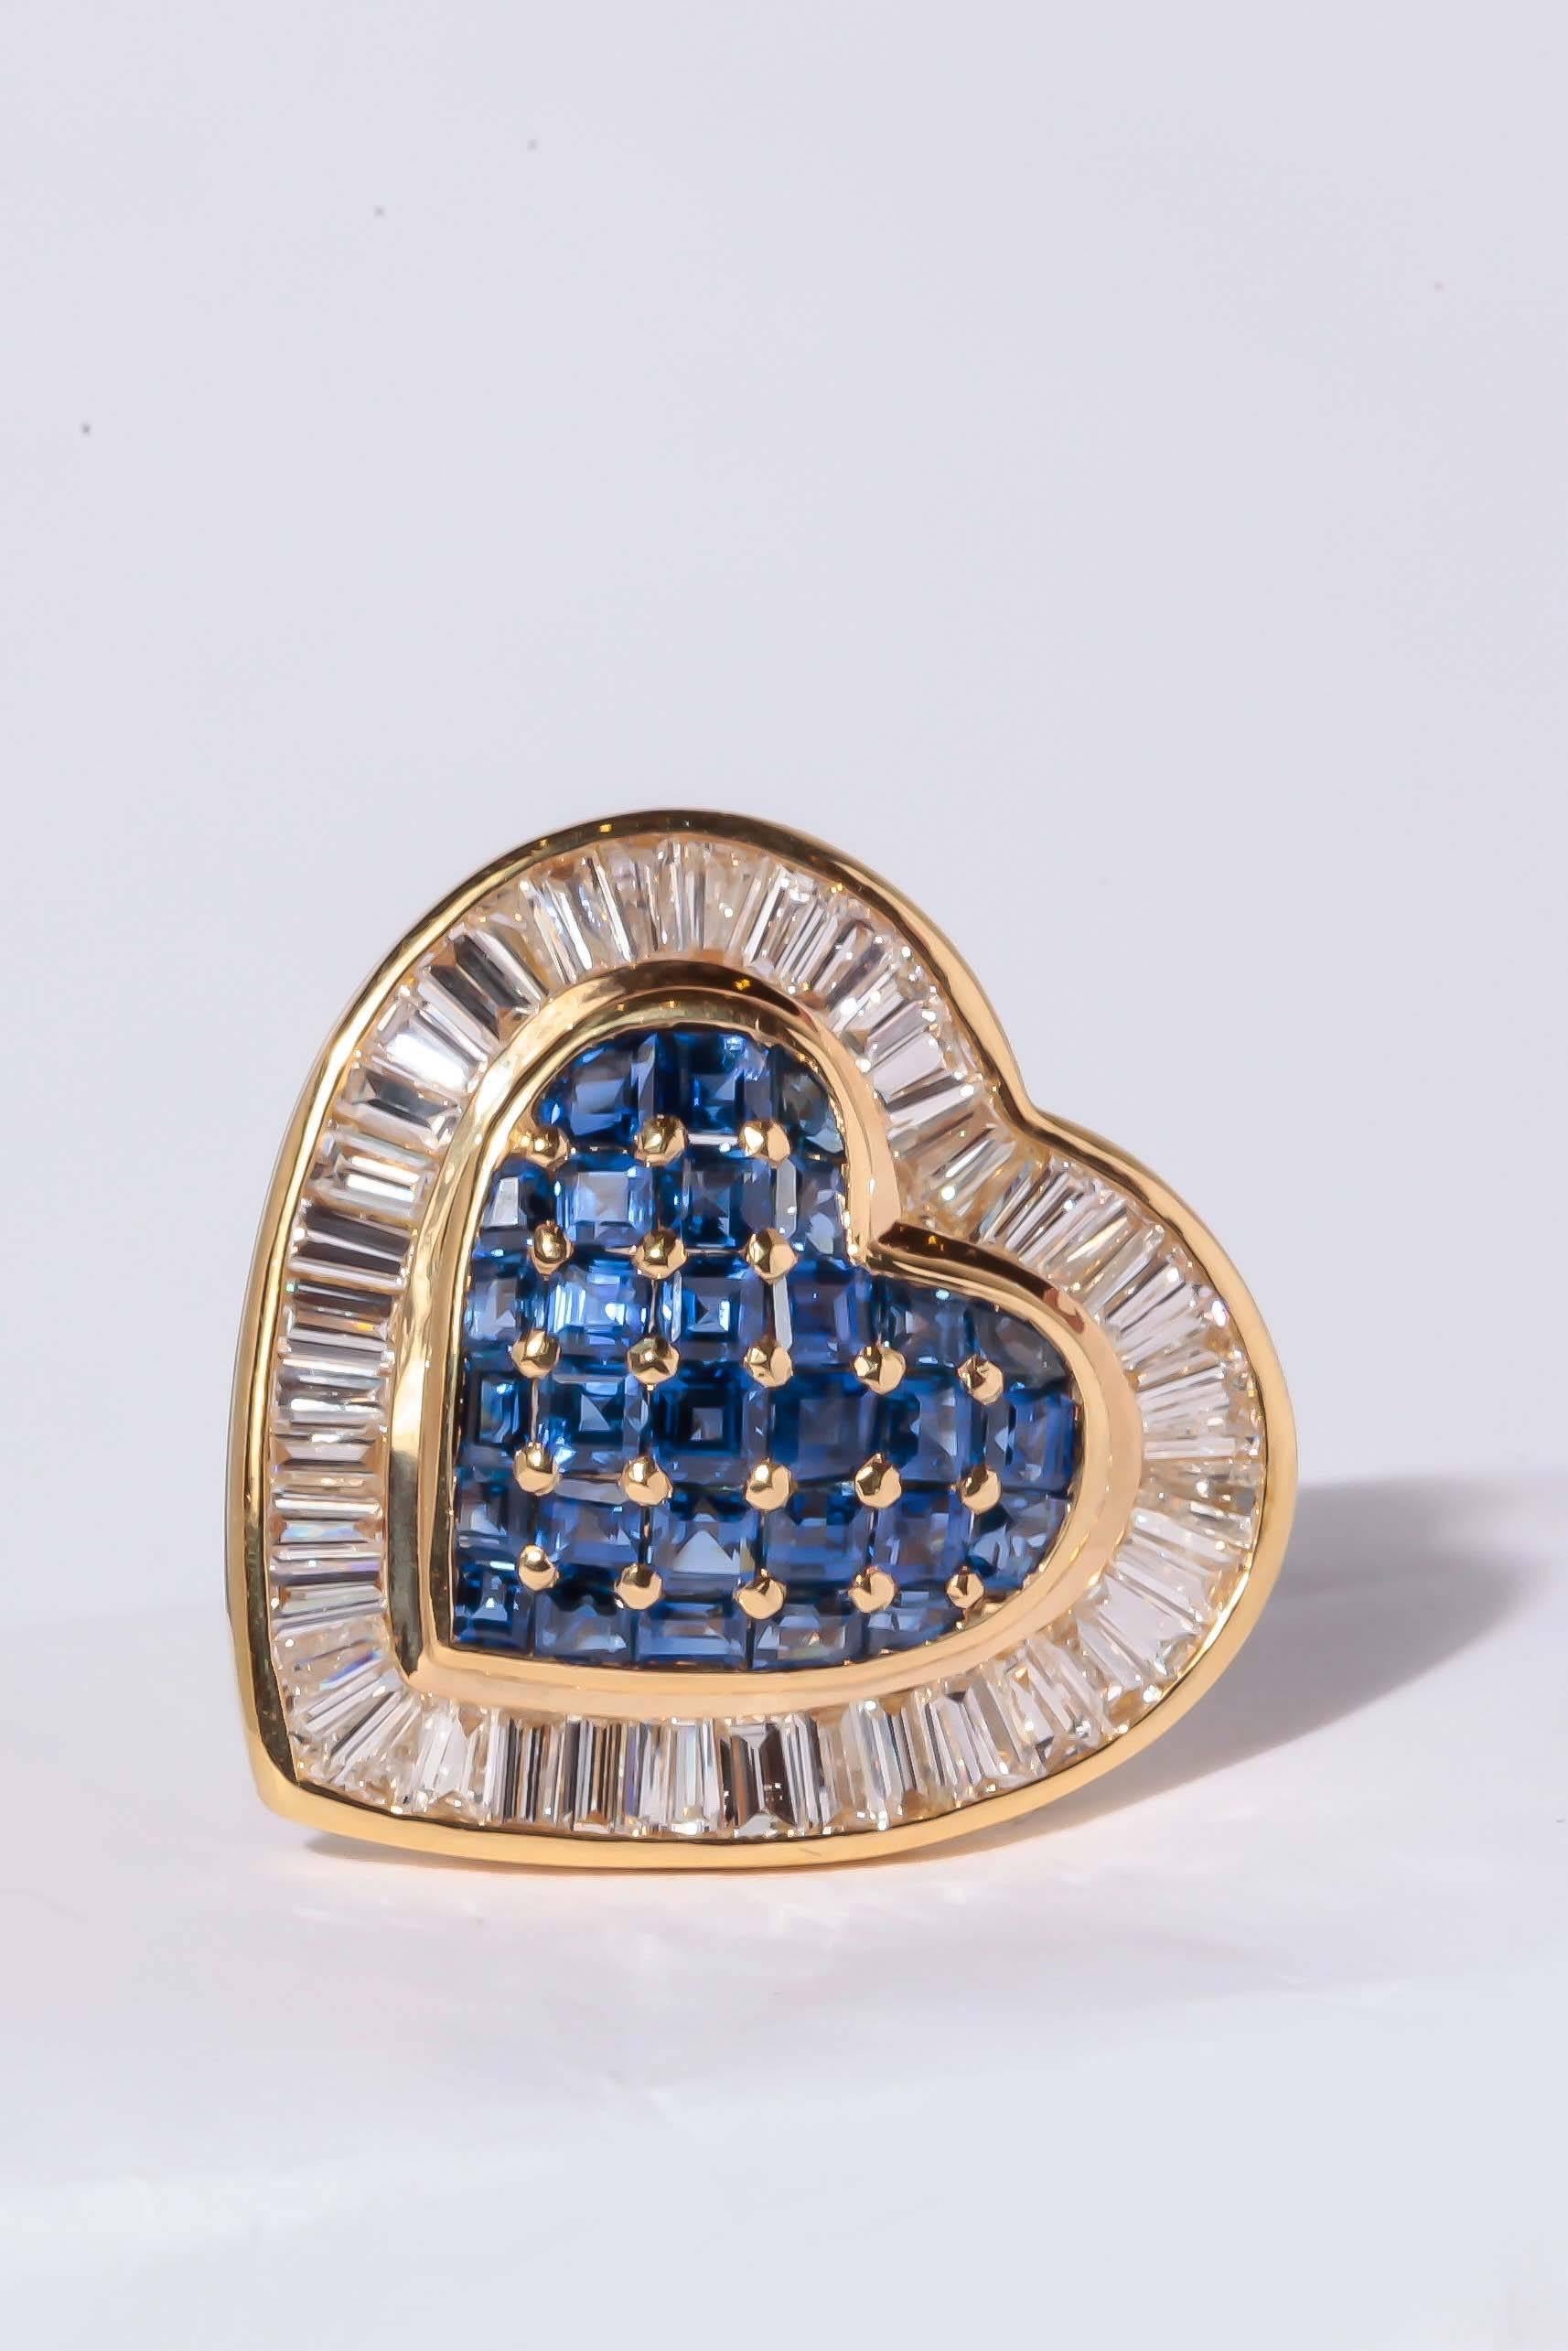 These 18 Carat yellow gold earrings are set with 60 square cut Gem quality Sapphires and are surrounded by 84 tapered diamond baguettes.  For a total weight of 2.50ct. of sapphires and 1.41 ct. of diamonds F-G color VS Clarity. The omega backs have